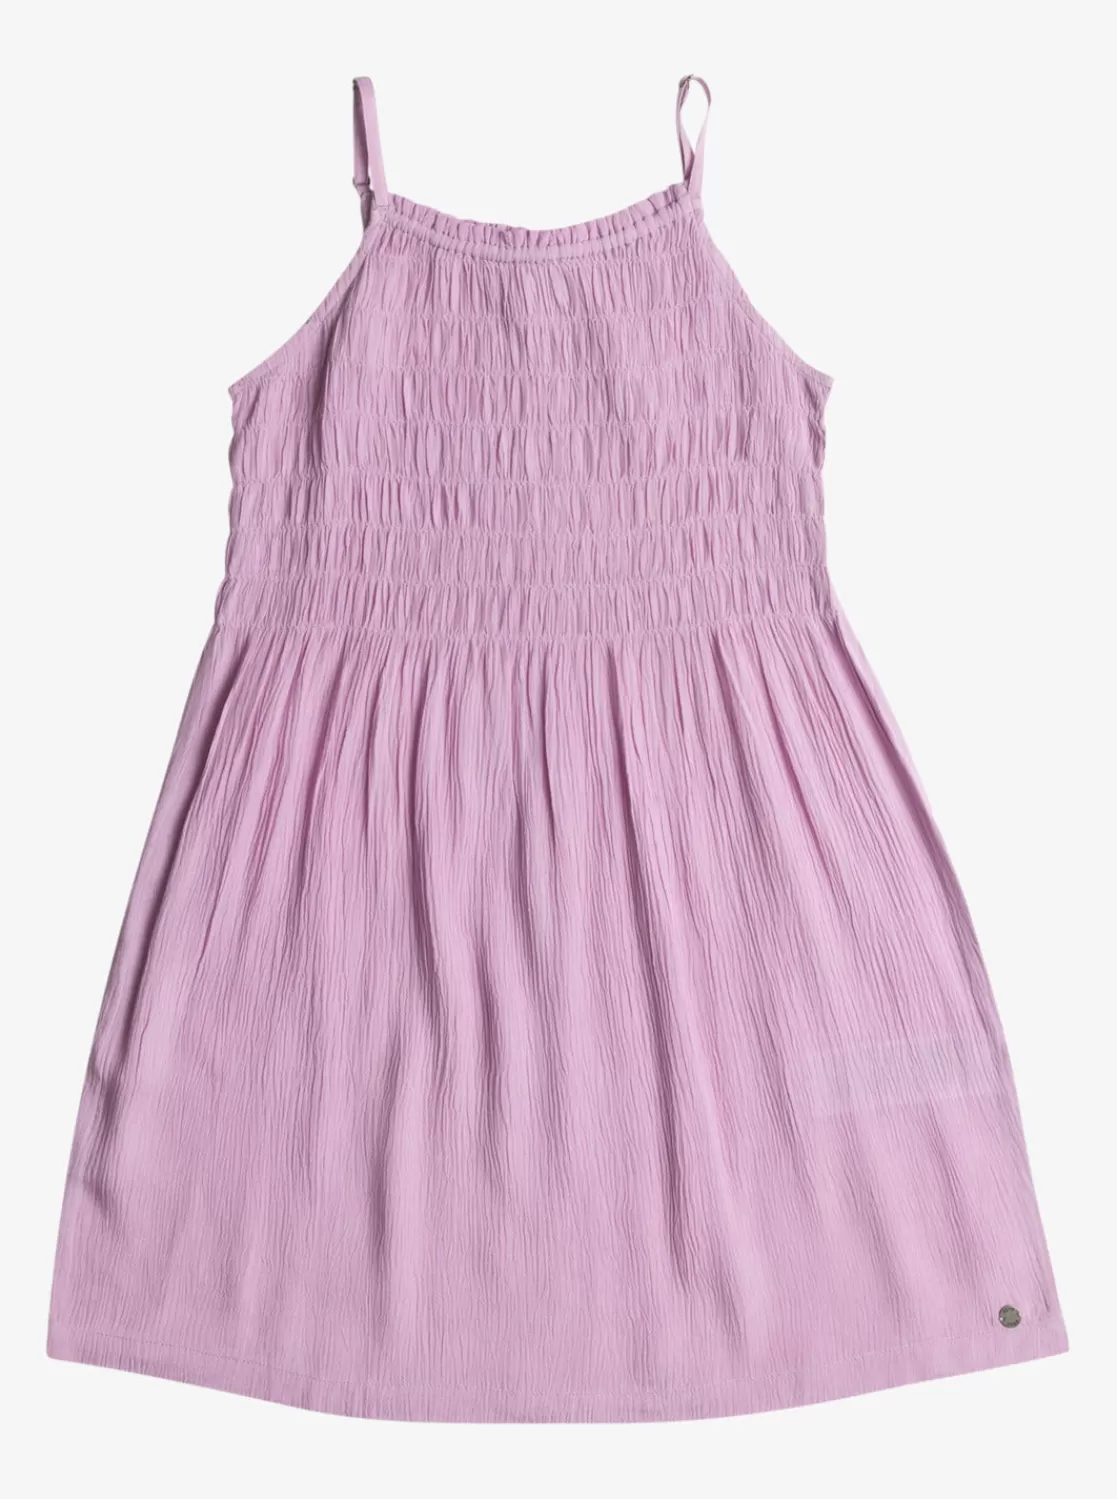 Girls 4-16 Look At Me Now Dress-ROXY Cheap